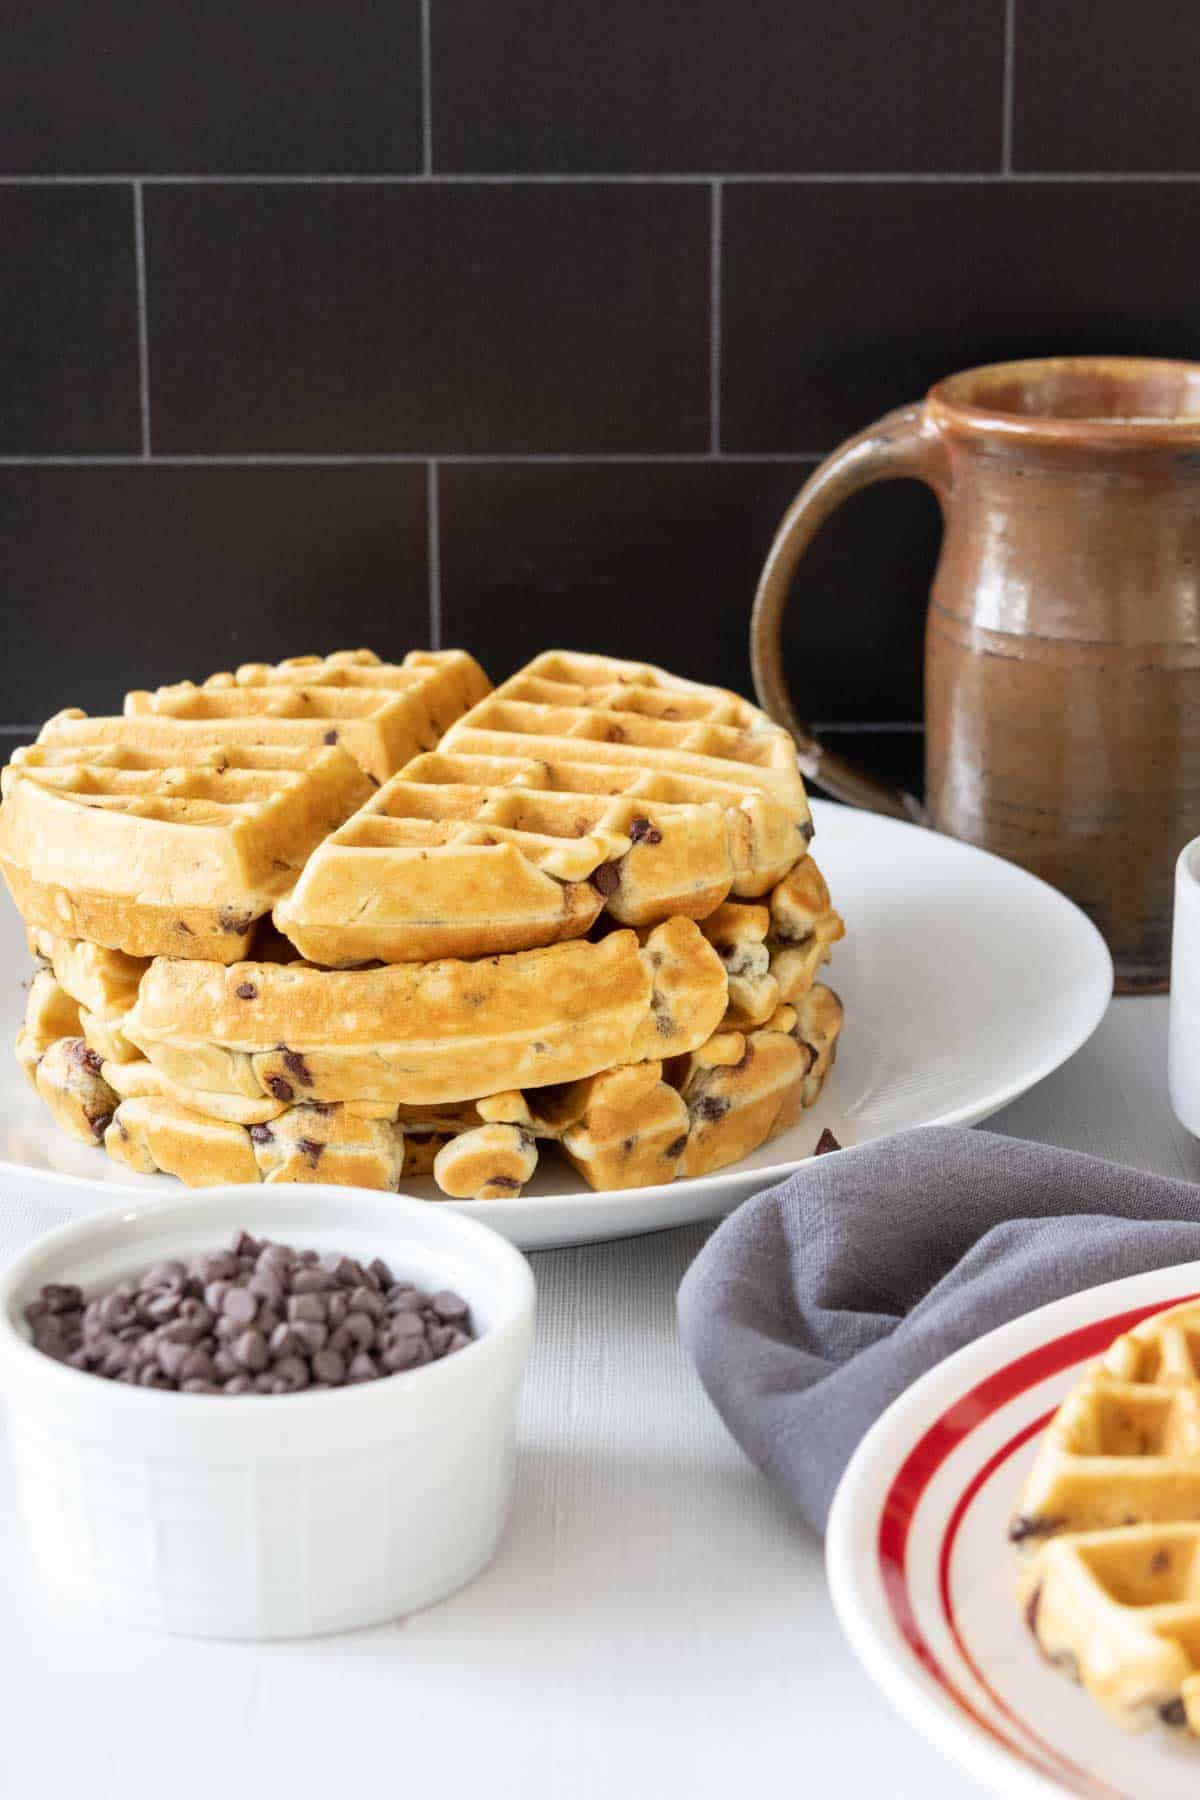 Plate with a stack of chocolate chip waffles and a white bowl of chocolate chips in front.